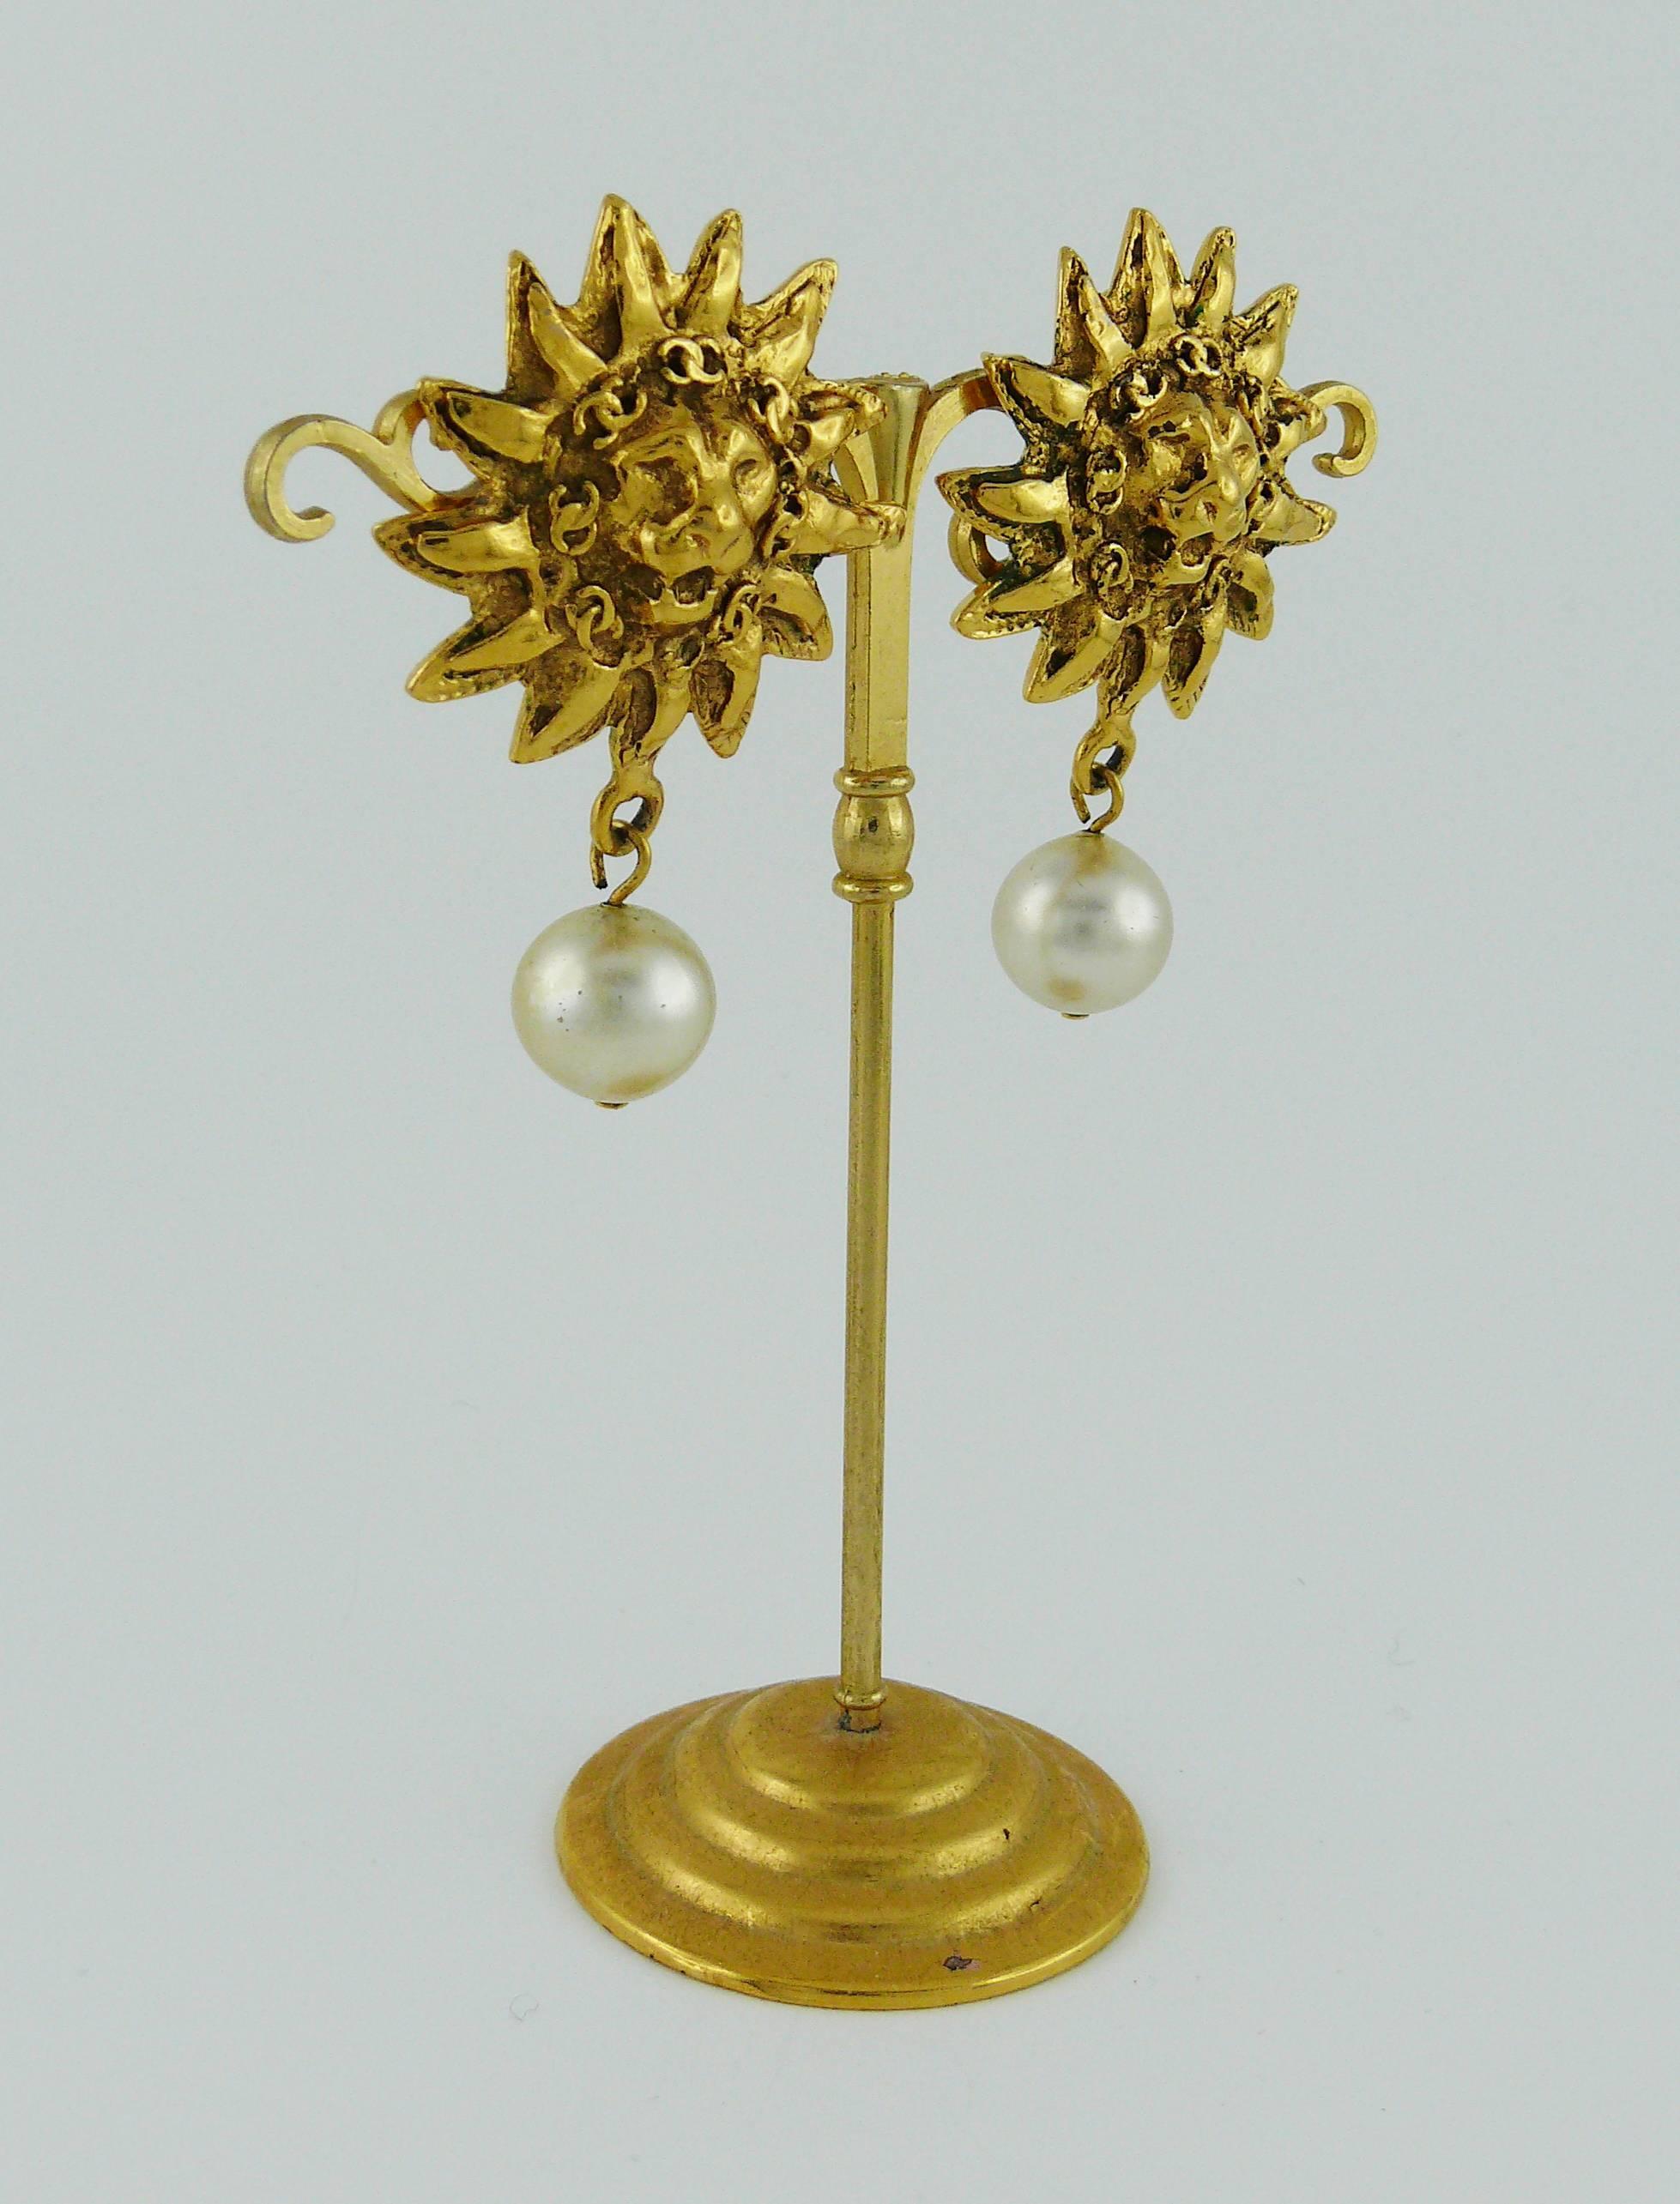 CHANEL vintage gold tone lion and faux pearl dangling earrings (clip-on).

Marked CHANEL Made in France.

JEWELRY CONDITION CHART
- New or never worn : item is in pristine condition with no noticeable imperfections
- Excellent : item has been used